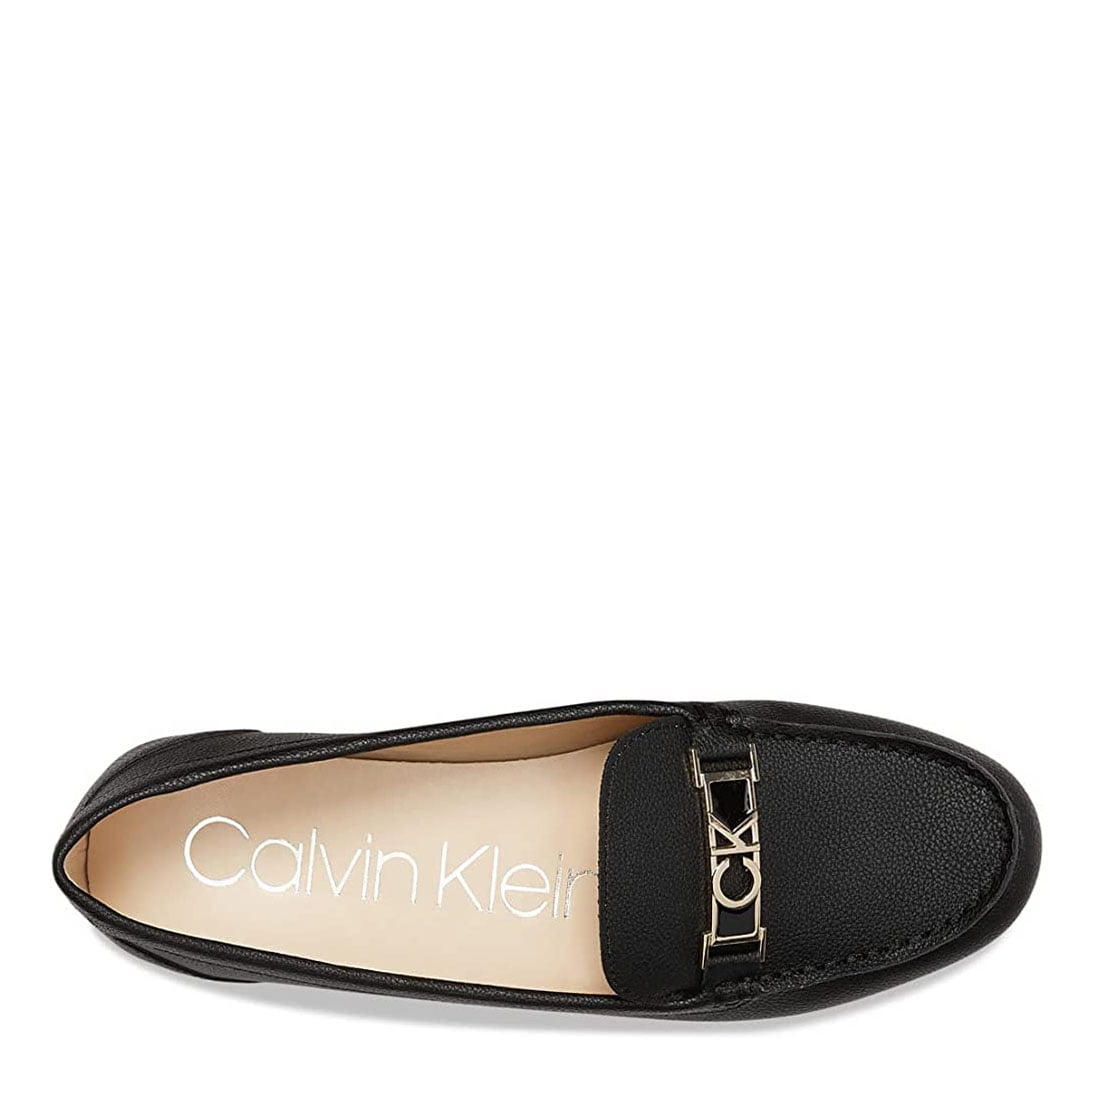 CALVIN KLEIN Women's Lacy Closed Toe Casual Shoes, Black, 7.5